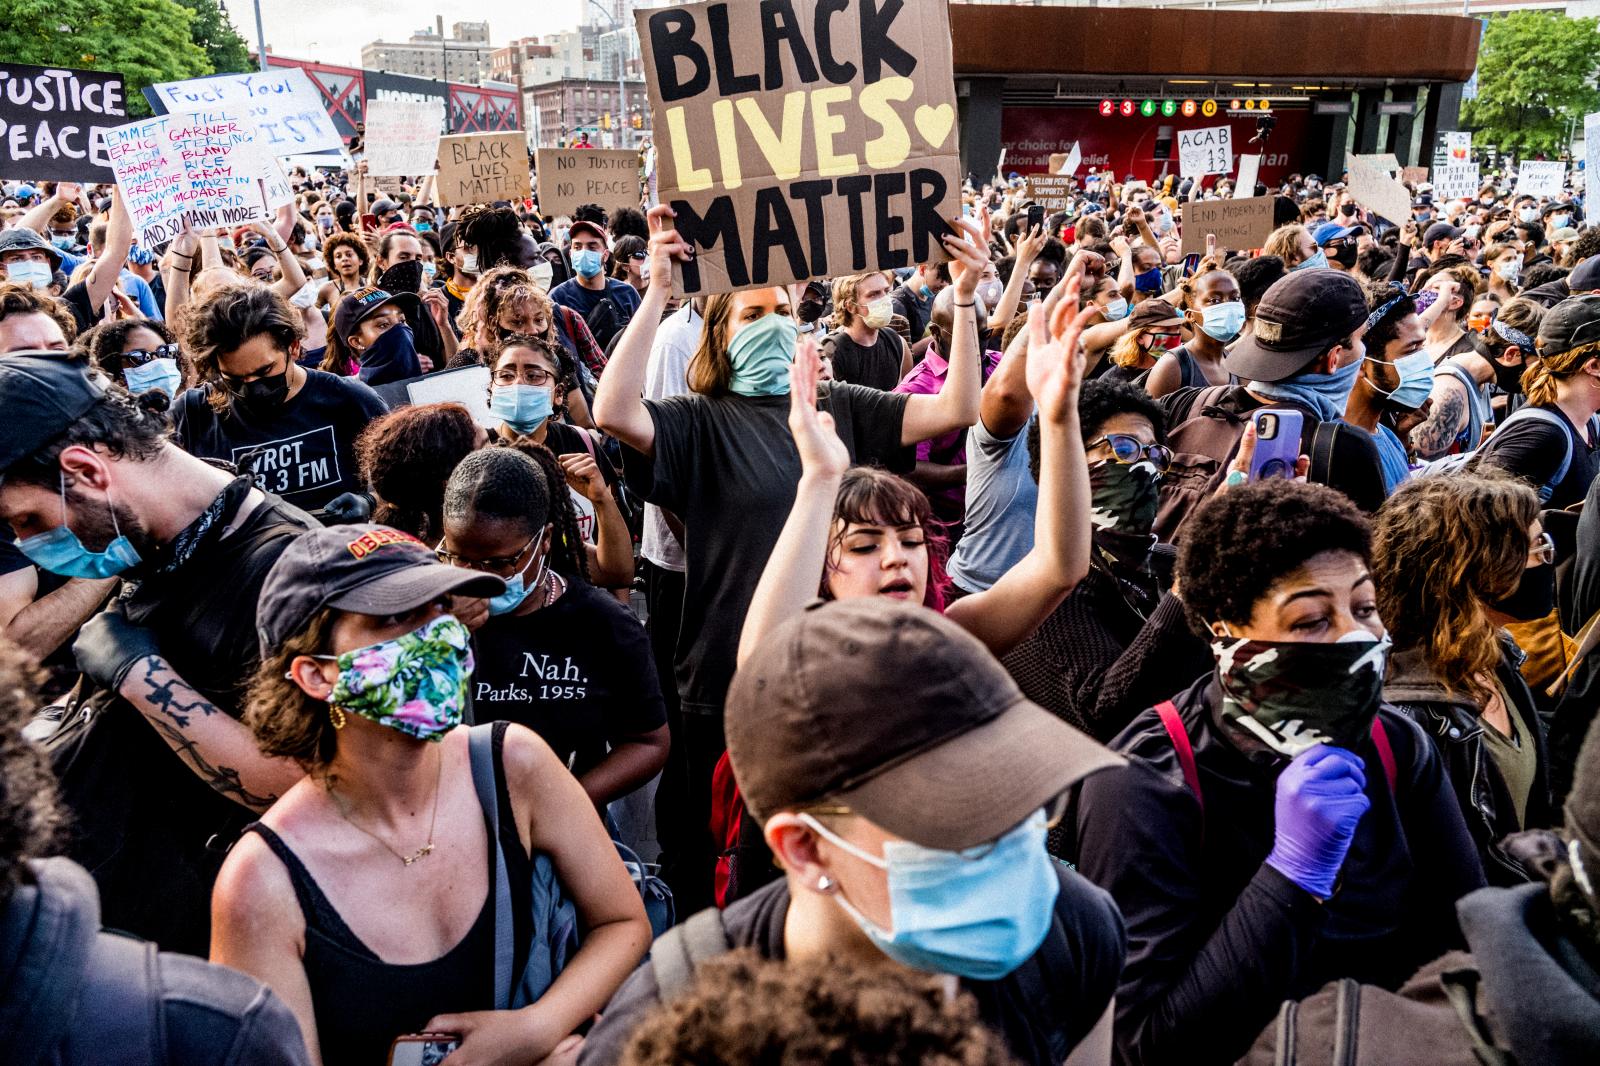 BLM Protest Rally/March 210224021 | Buy this image